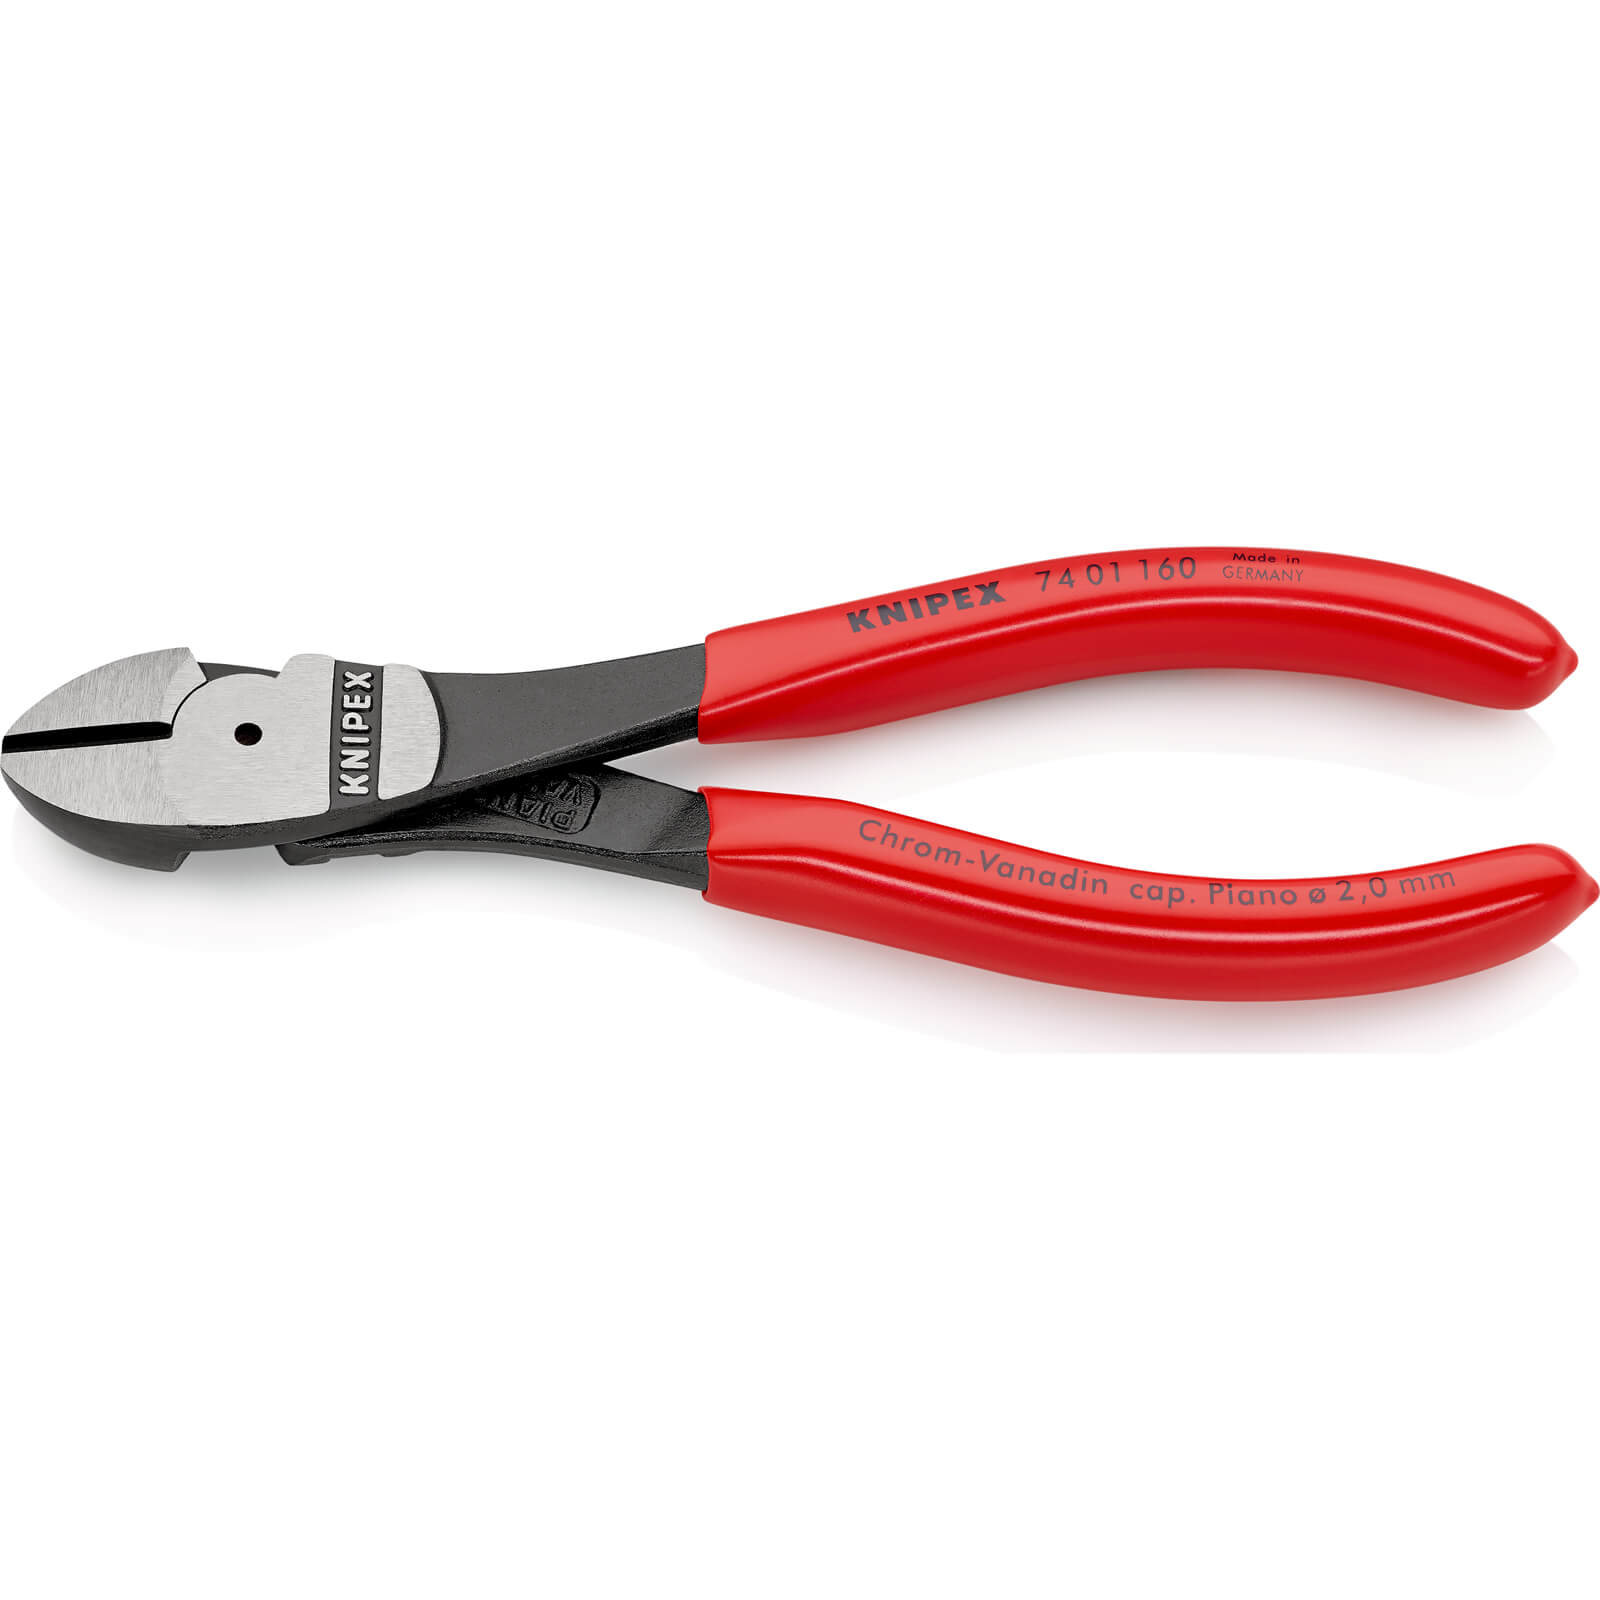 Photo of Knipex 74 01 High Leverage Diagonal Cutting Pliers 160mm